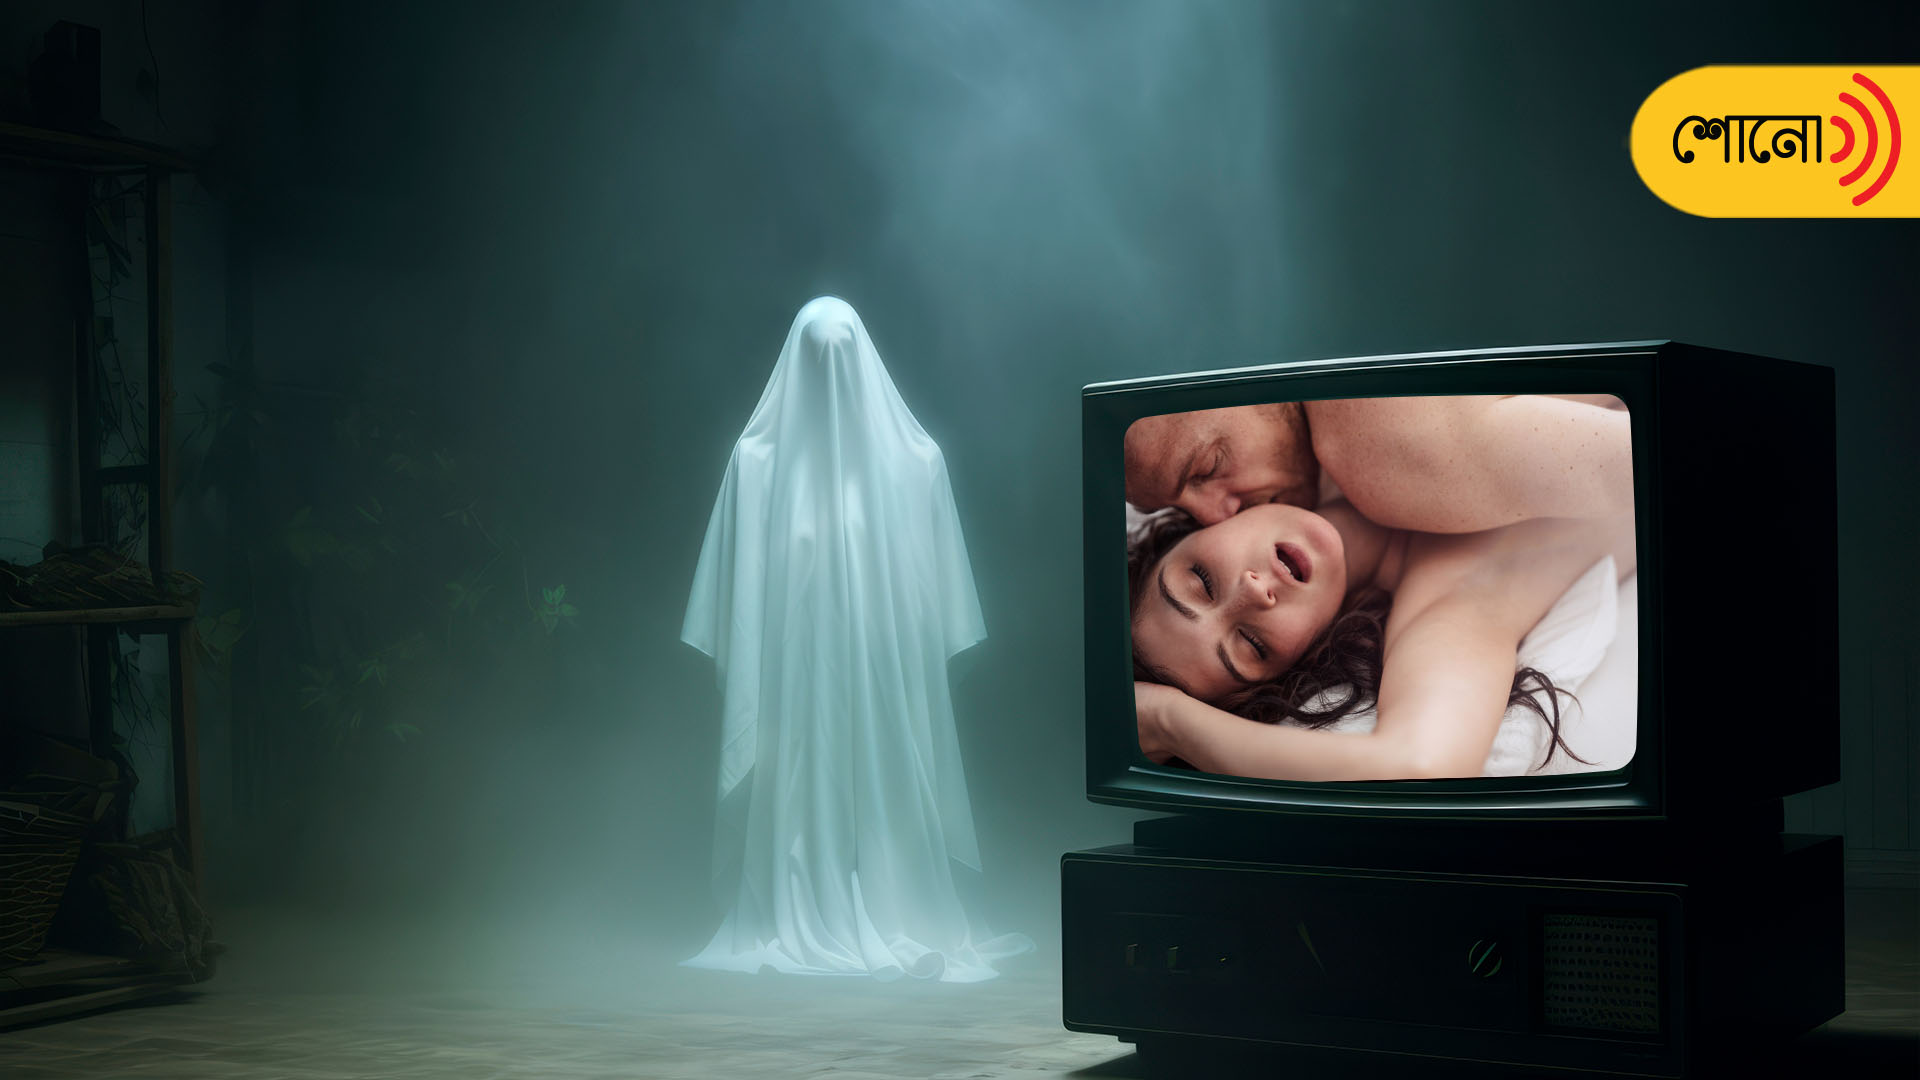 horror films can be erotic too